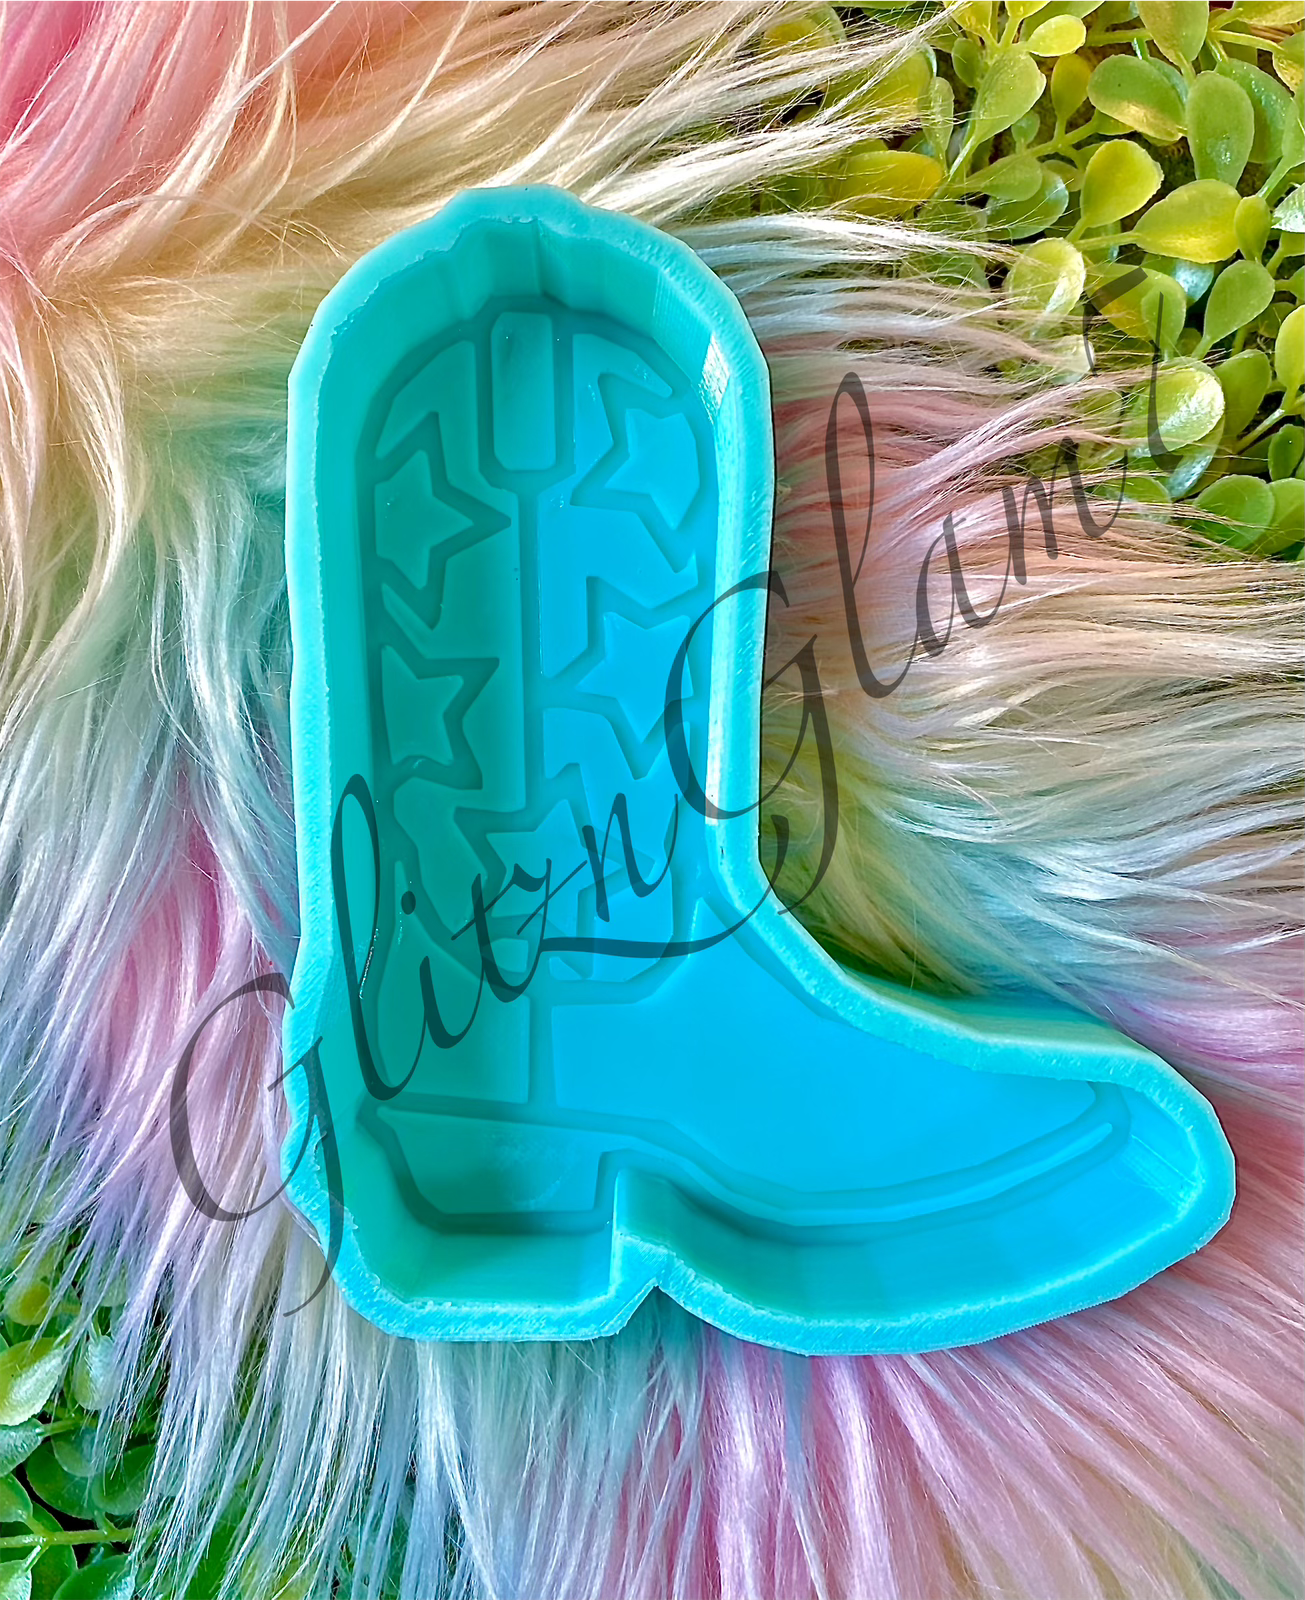 Cowgirl Boot w/ Stars Freshie Silicone Mold